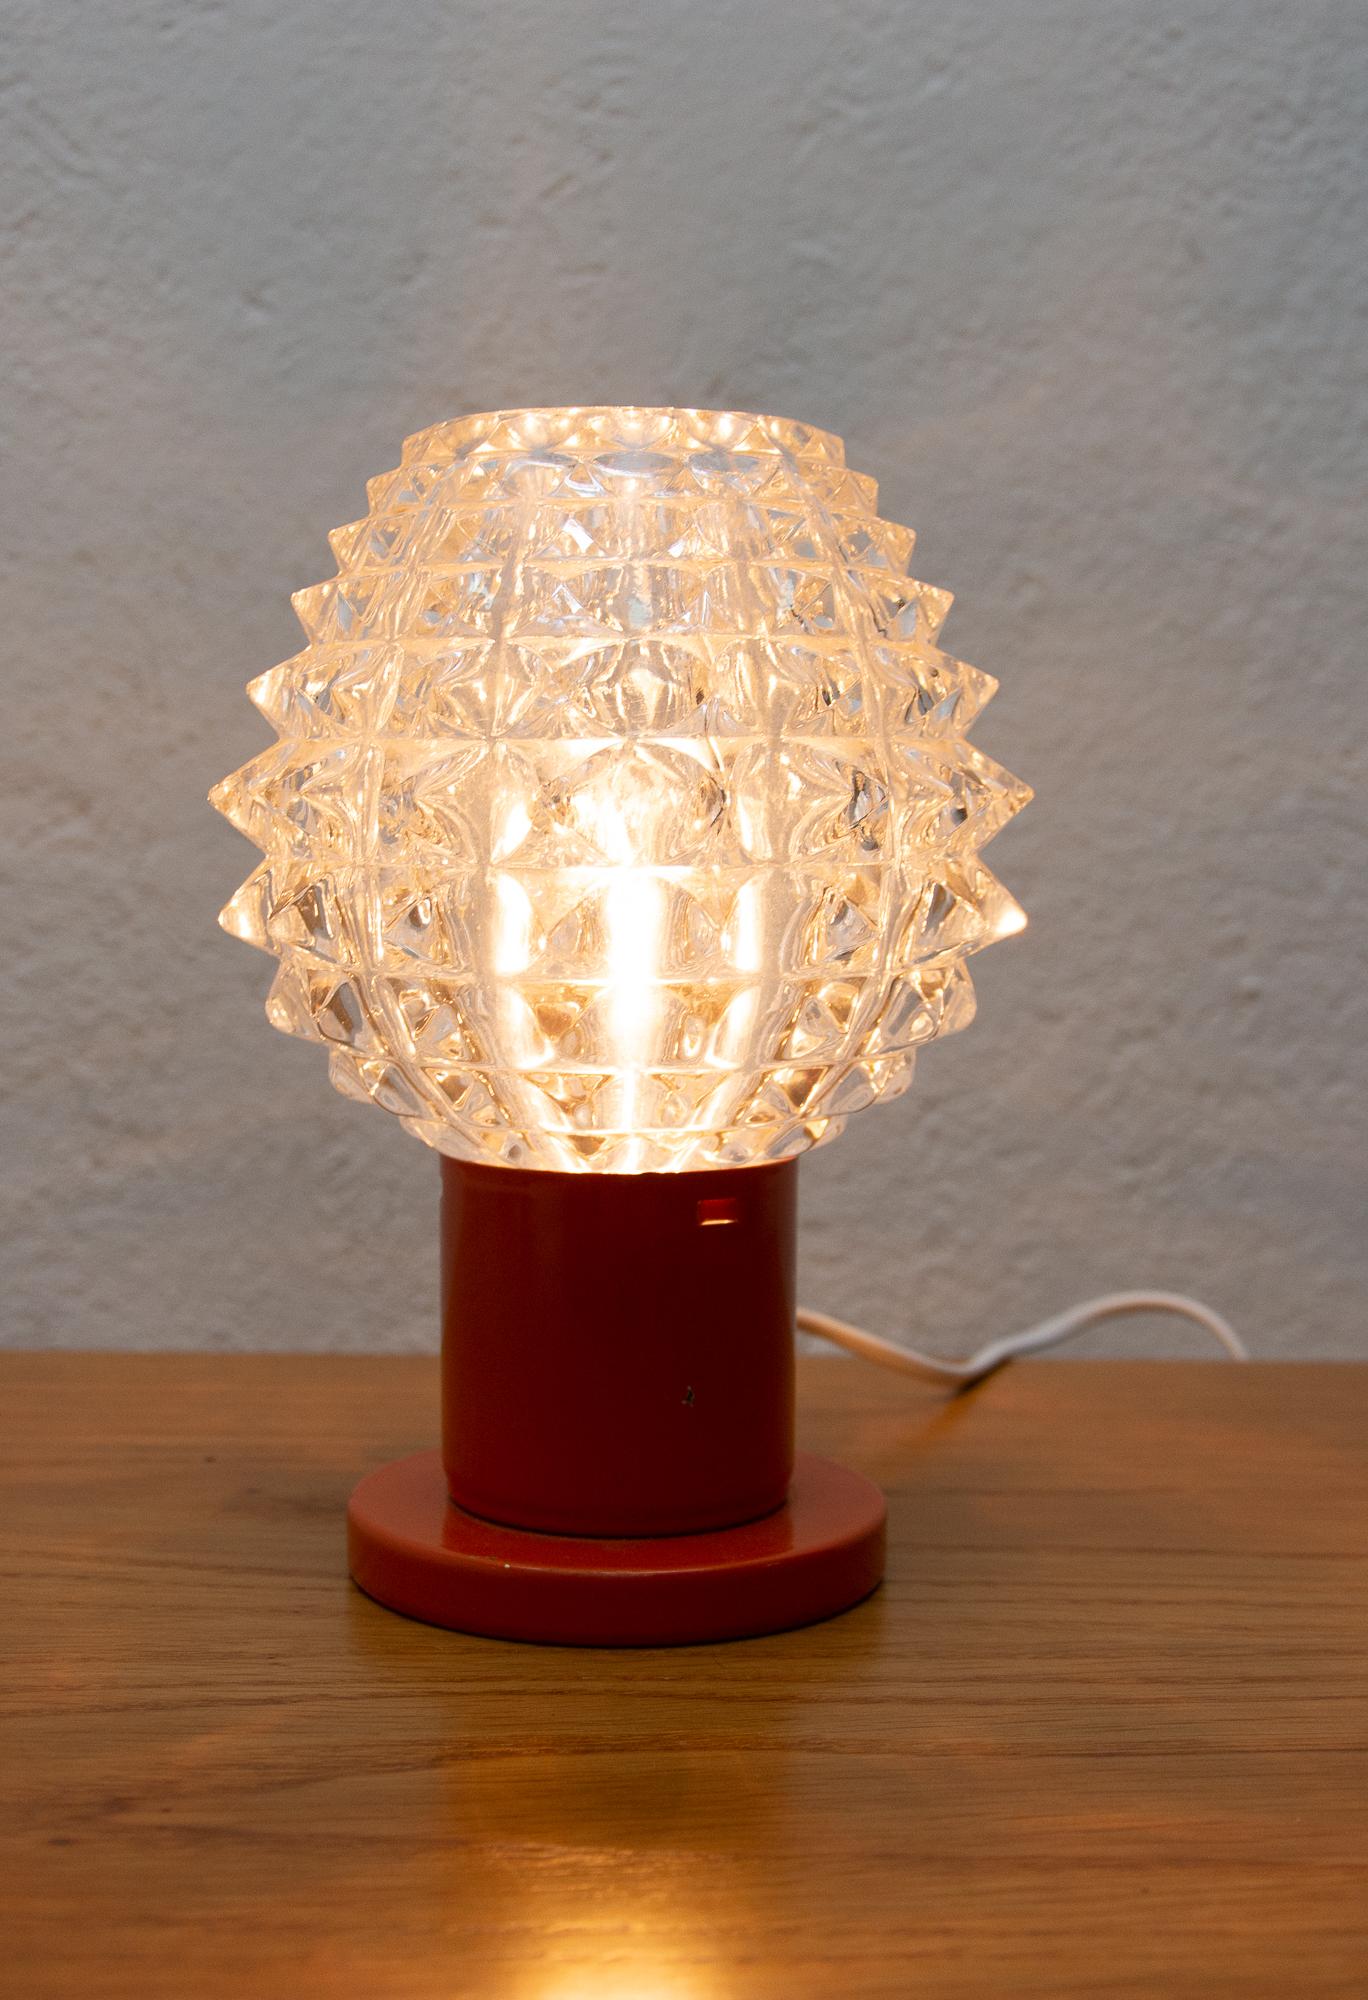 Vintage midcentury table lamp from the 1960s. It was produced by Kamenicky Šenov. The lamp is fully functional. Very well preserved condition. Cut glass, brass stand. One E-14 Bulb. 250 V.